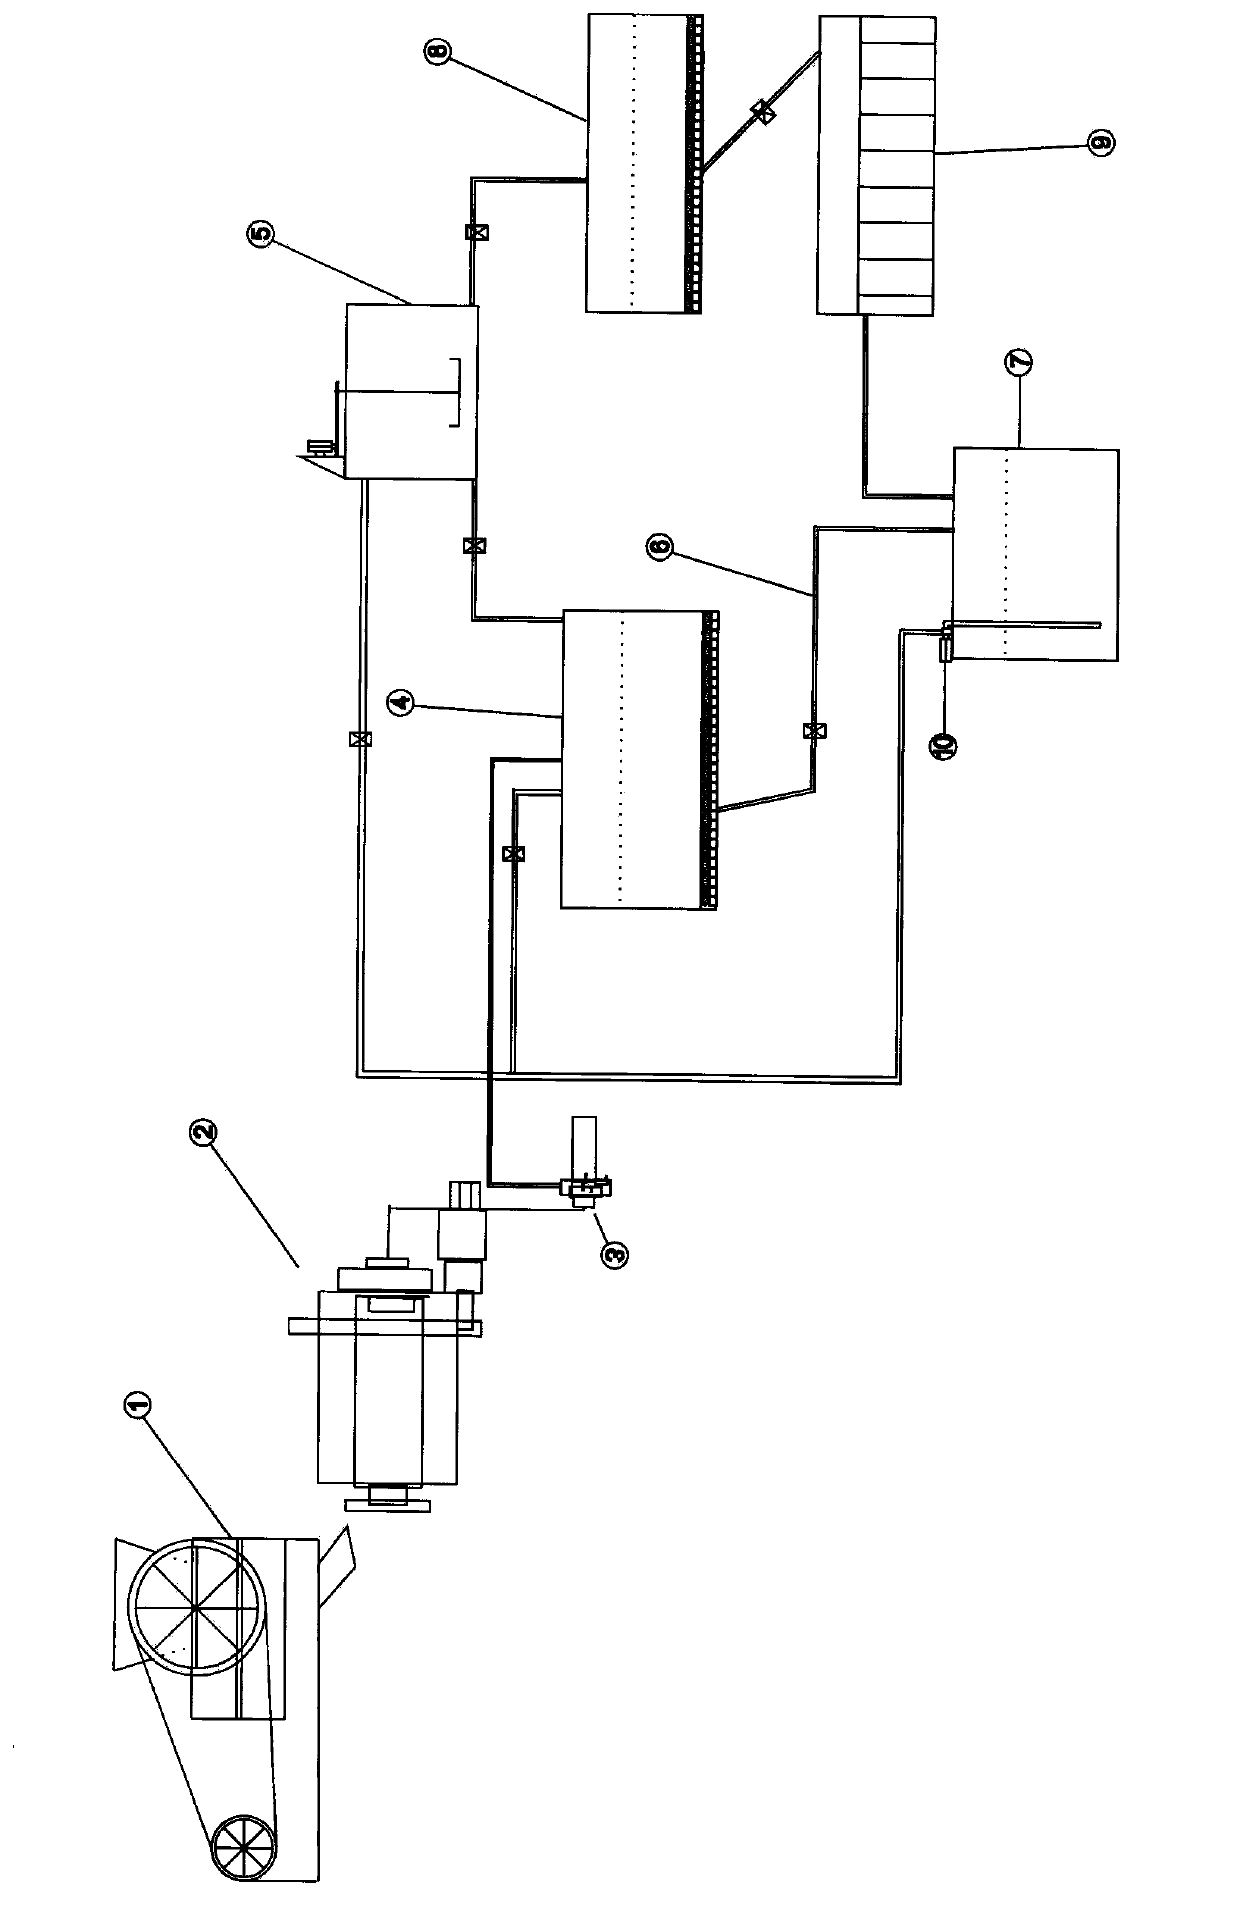 Method for producing copper concentrate by using copper oxide ore or copper slag